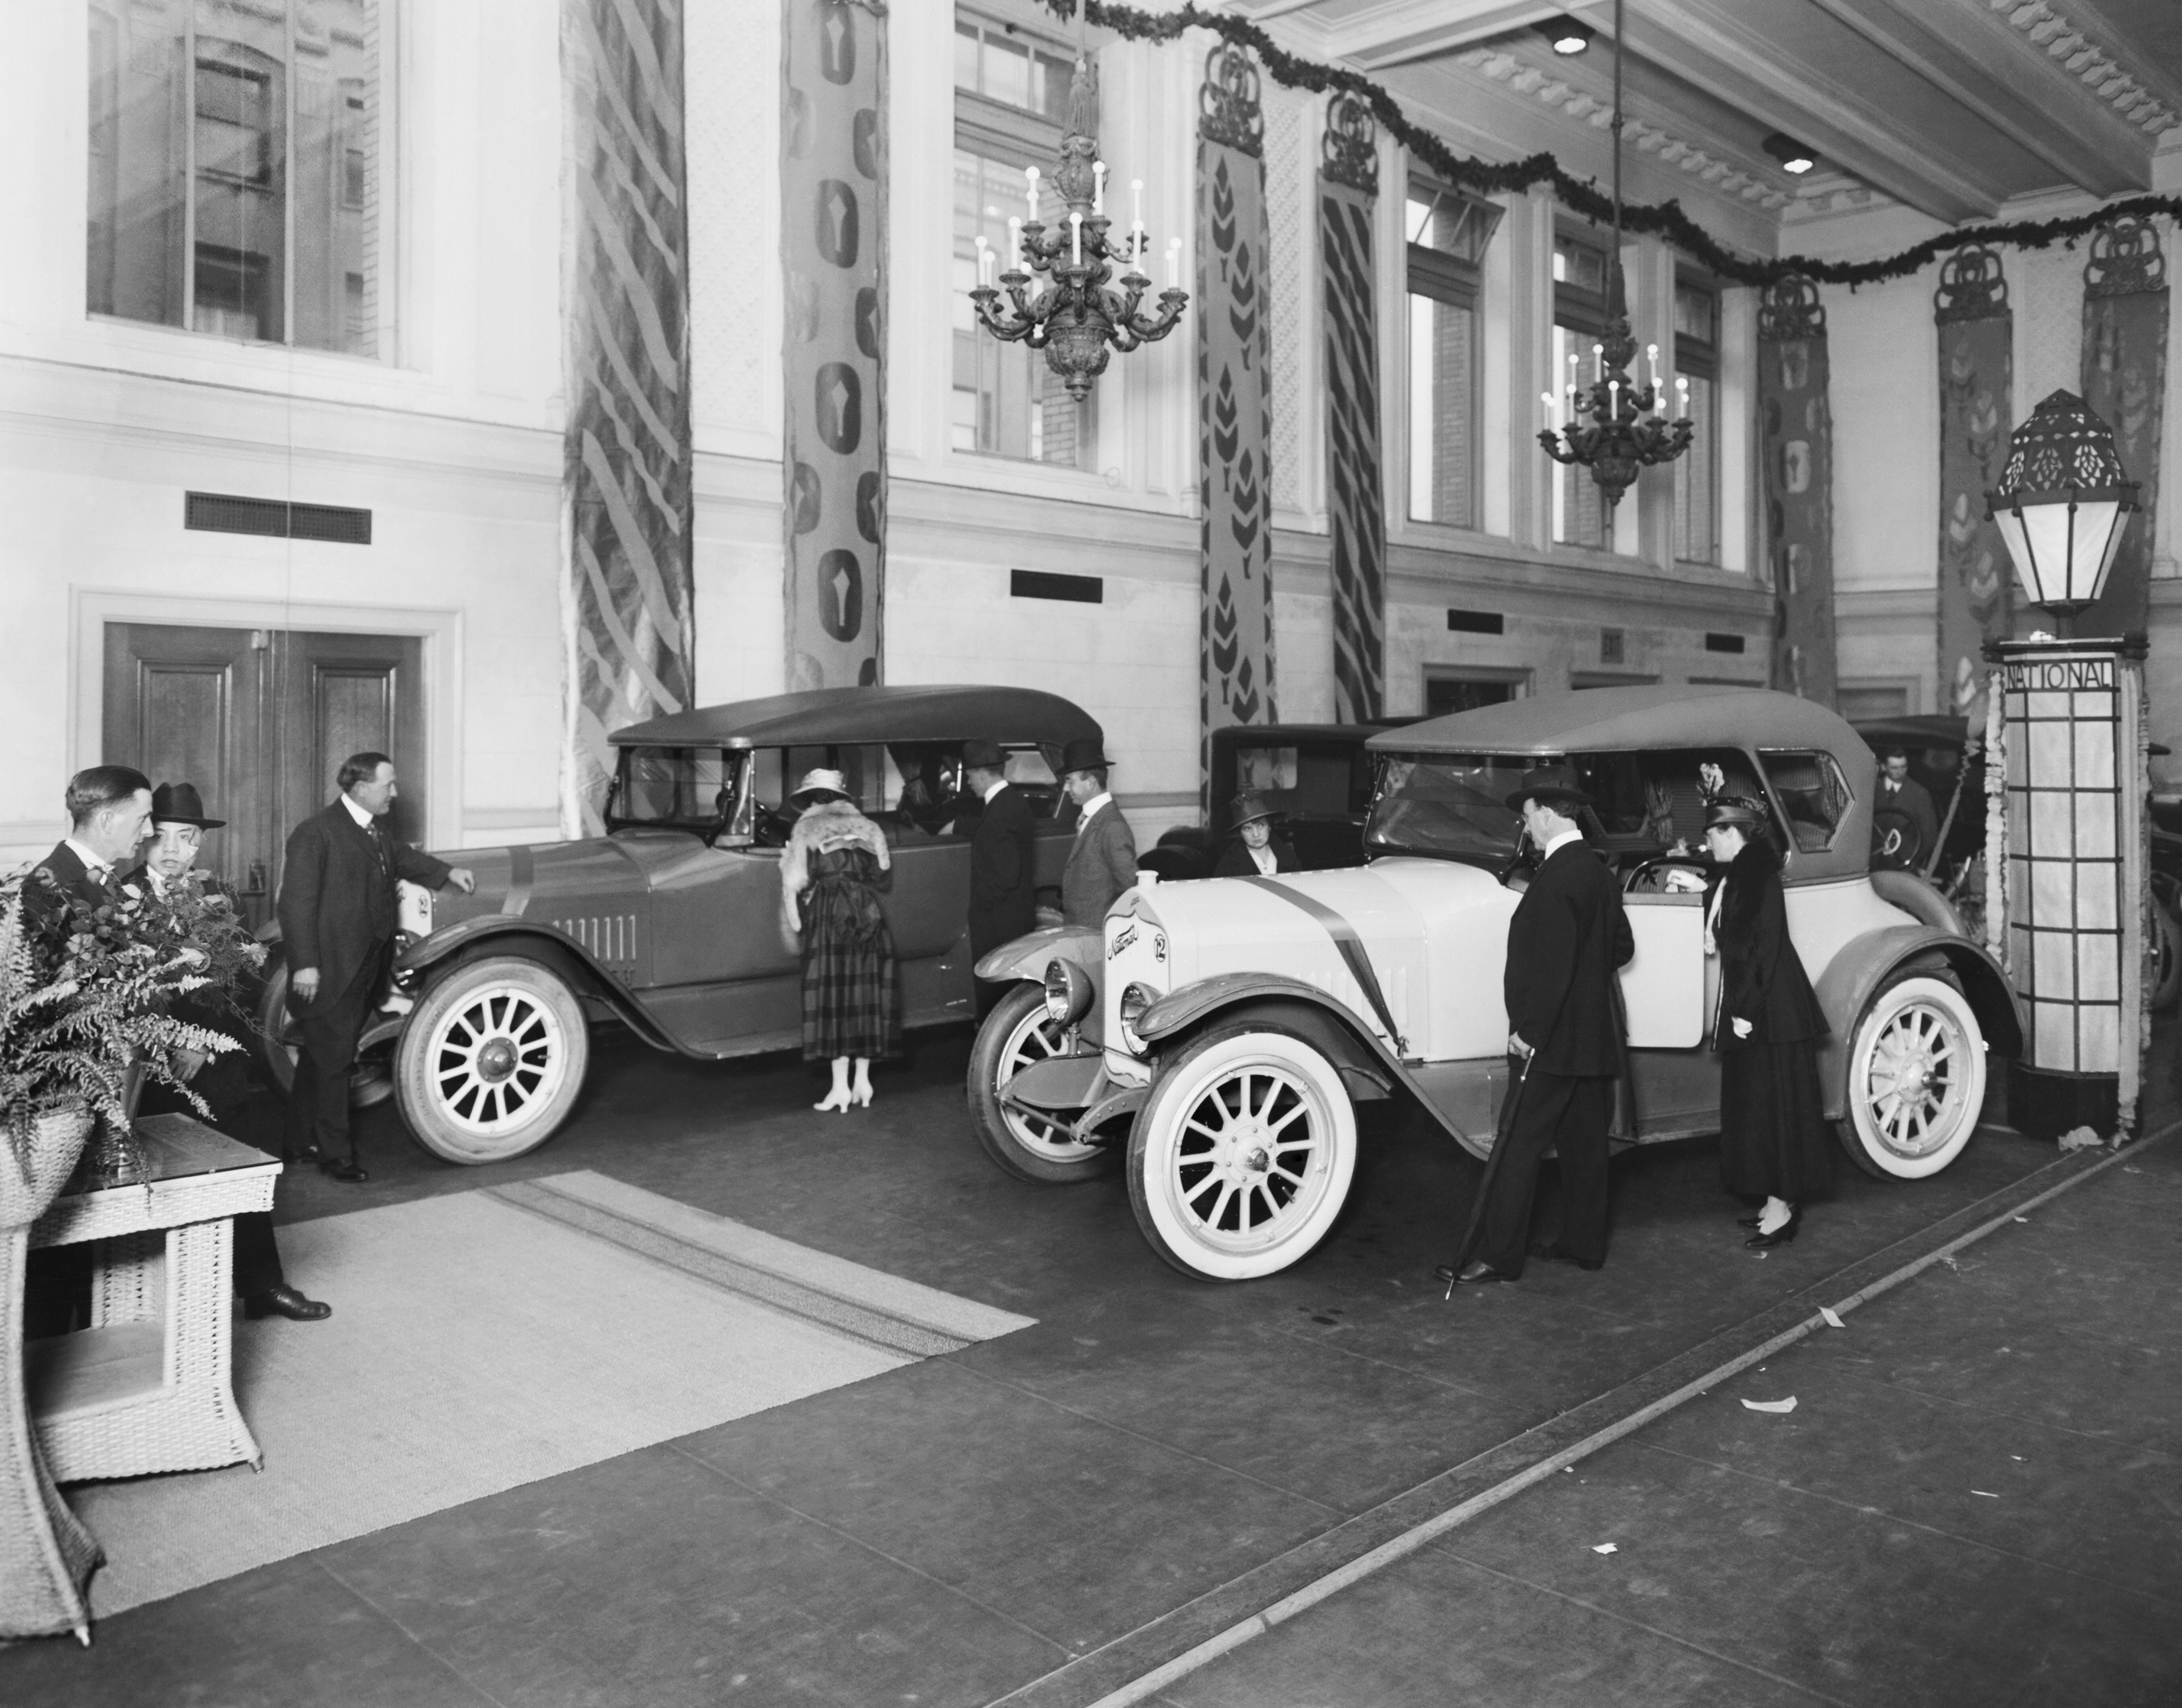 Two couples look through the windows of two cars in an old-timey car showroom with high ceilings and chandeliers.